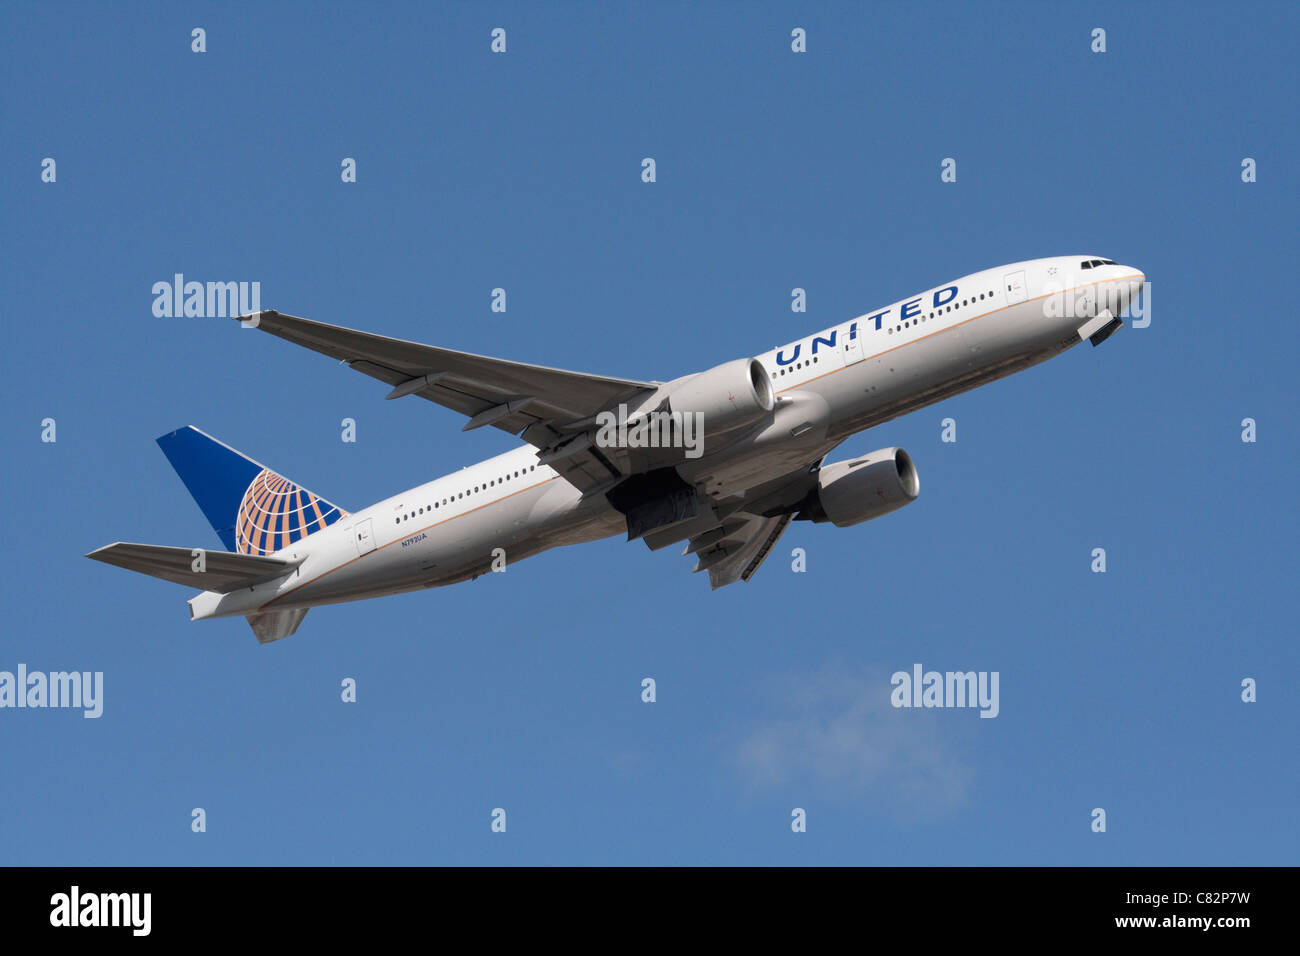 United Airlines Boeing 777-200ER long haul passenger jet plane on takeoff at the start of an intercontinental flight Stock Photo